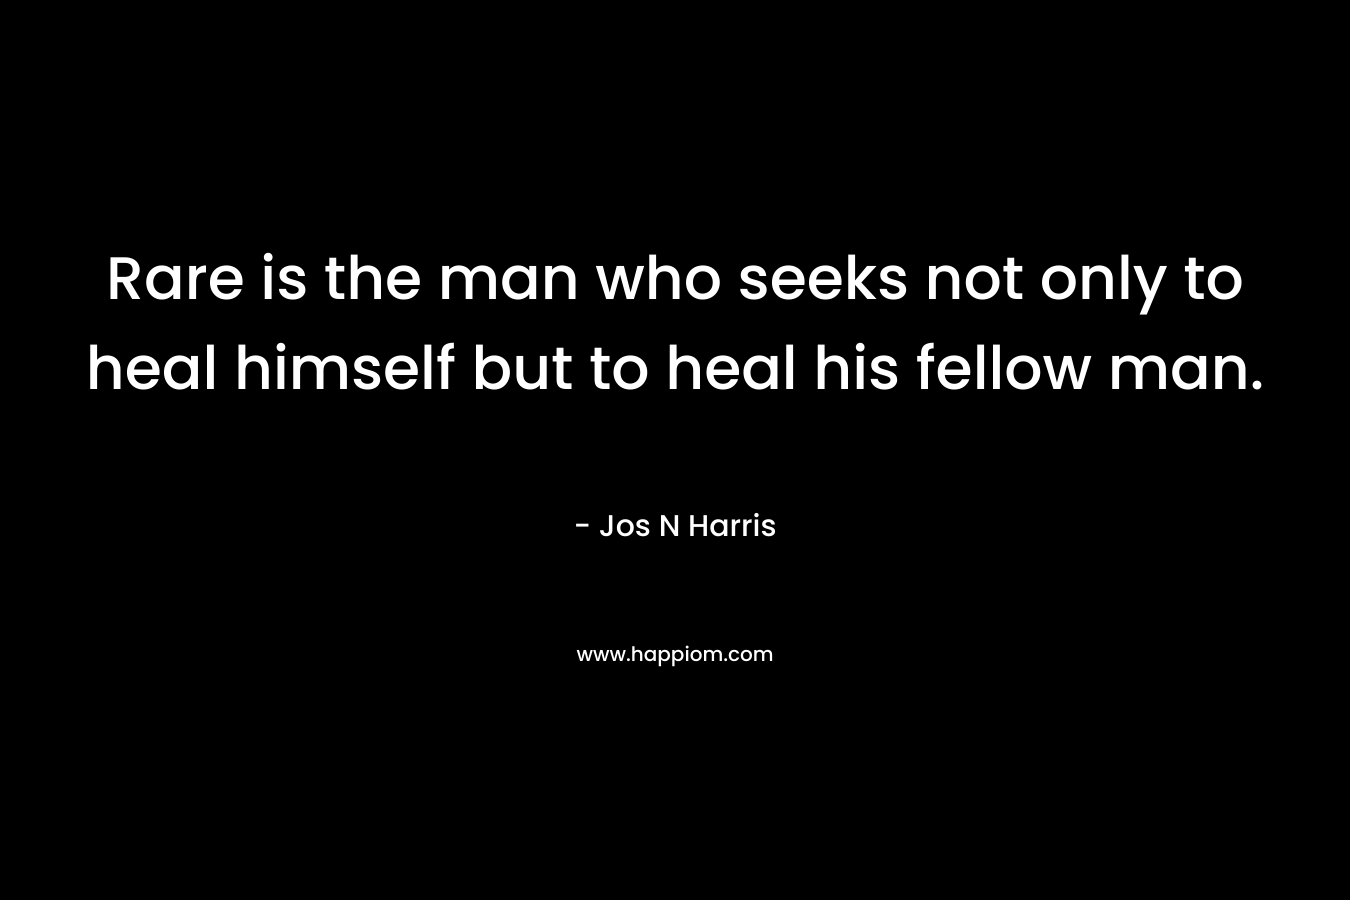 Rare is the man who seeks not only to heal himself but to heal his fellow man.